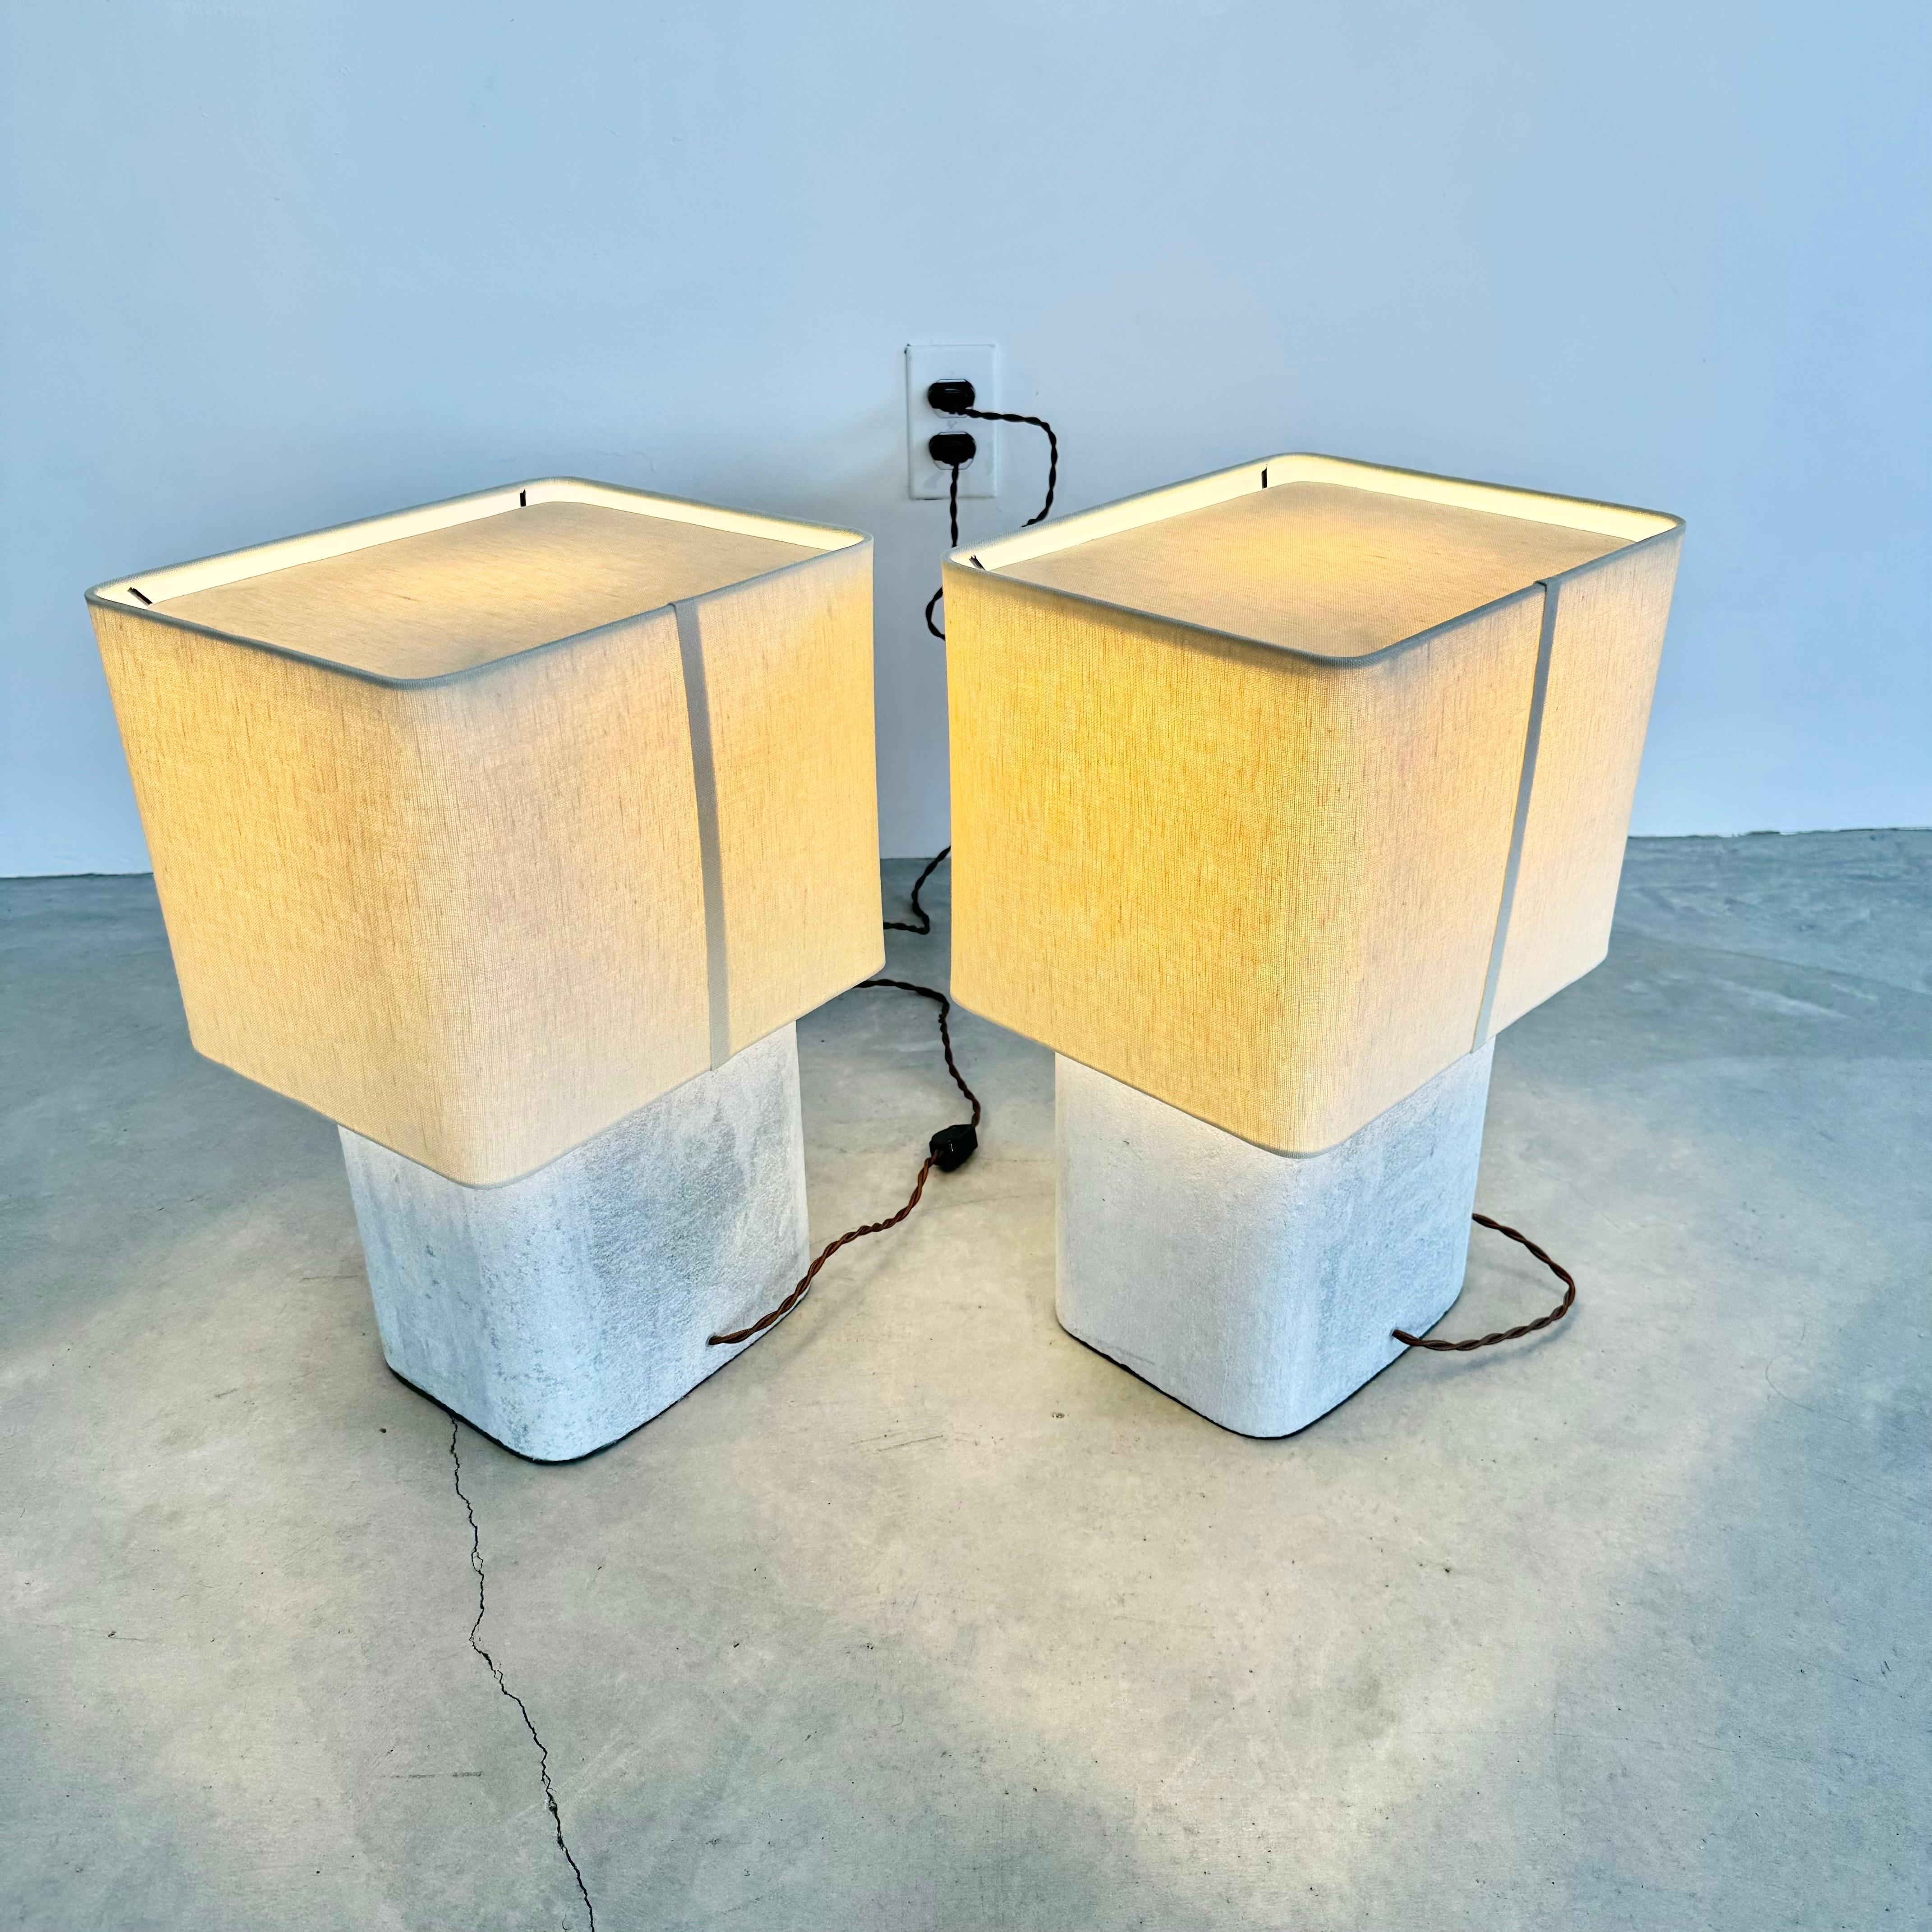 Pair of Willy Guhl Concrete Table Lamps, 1960s Switzerland For Sale 2